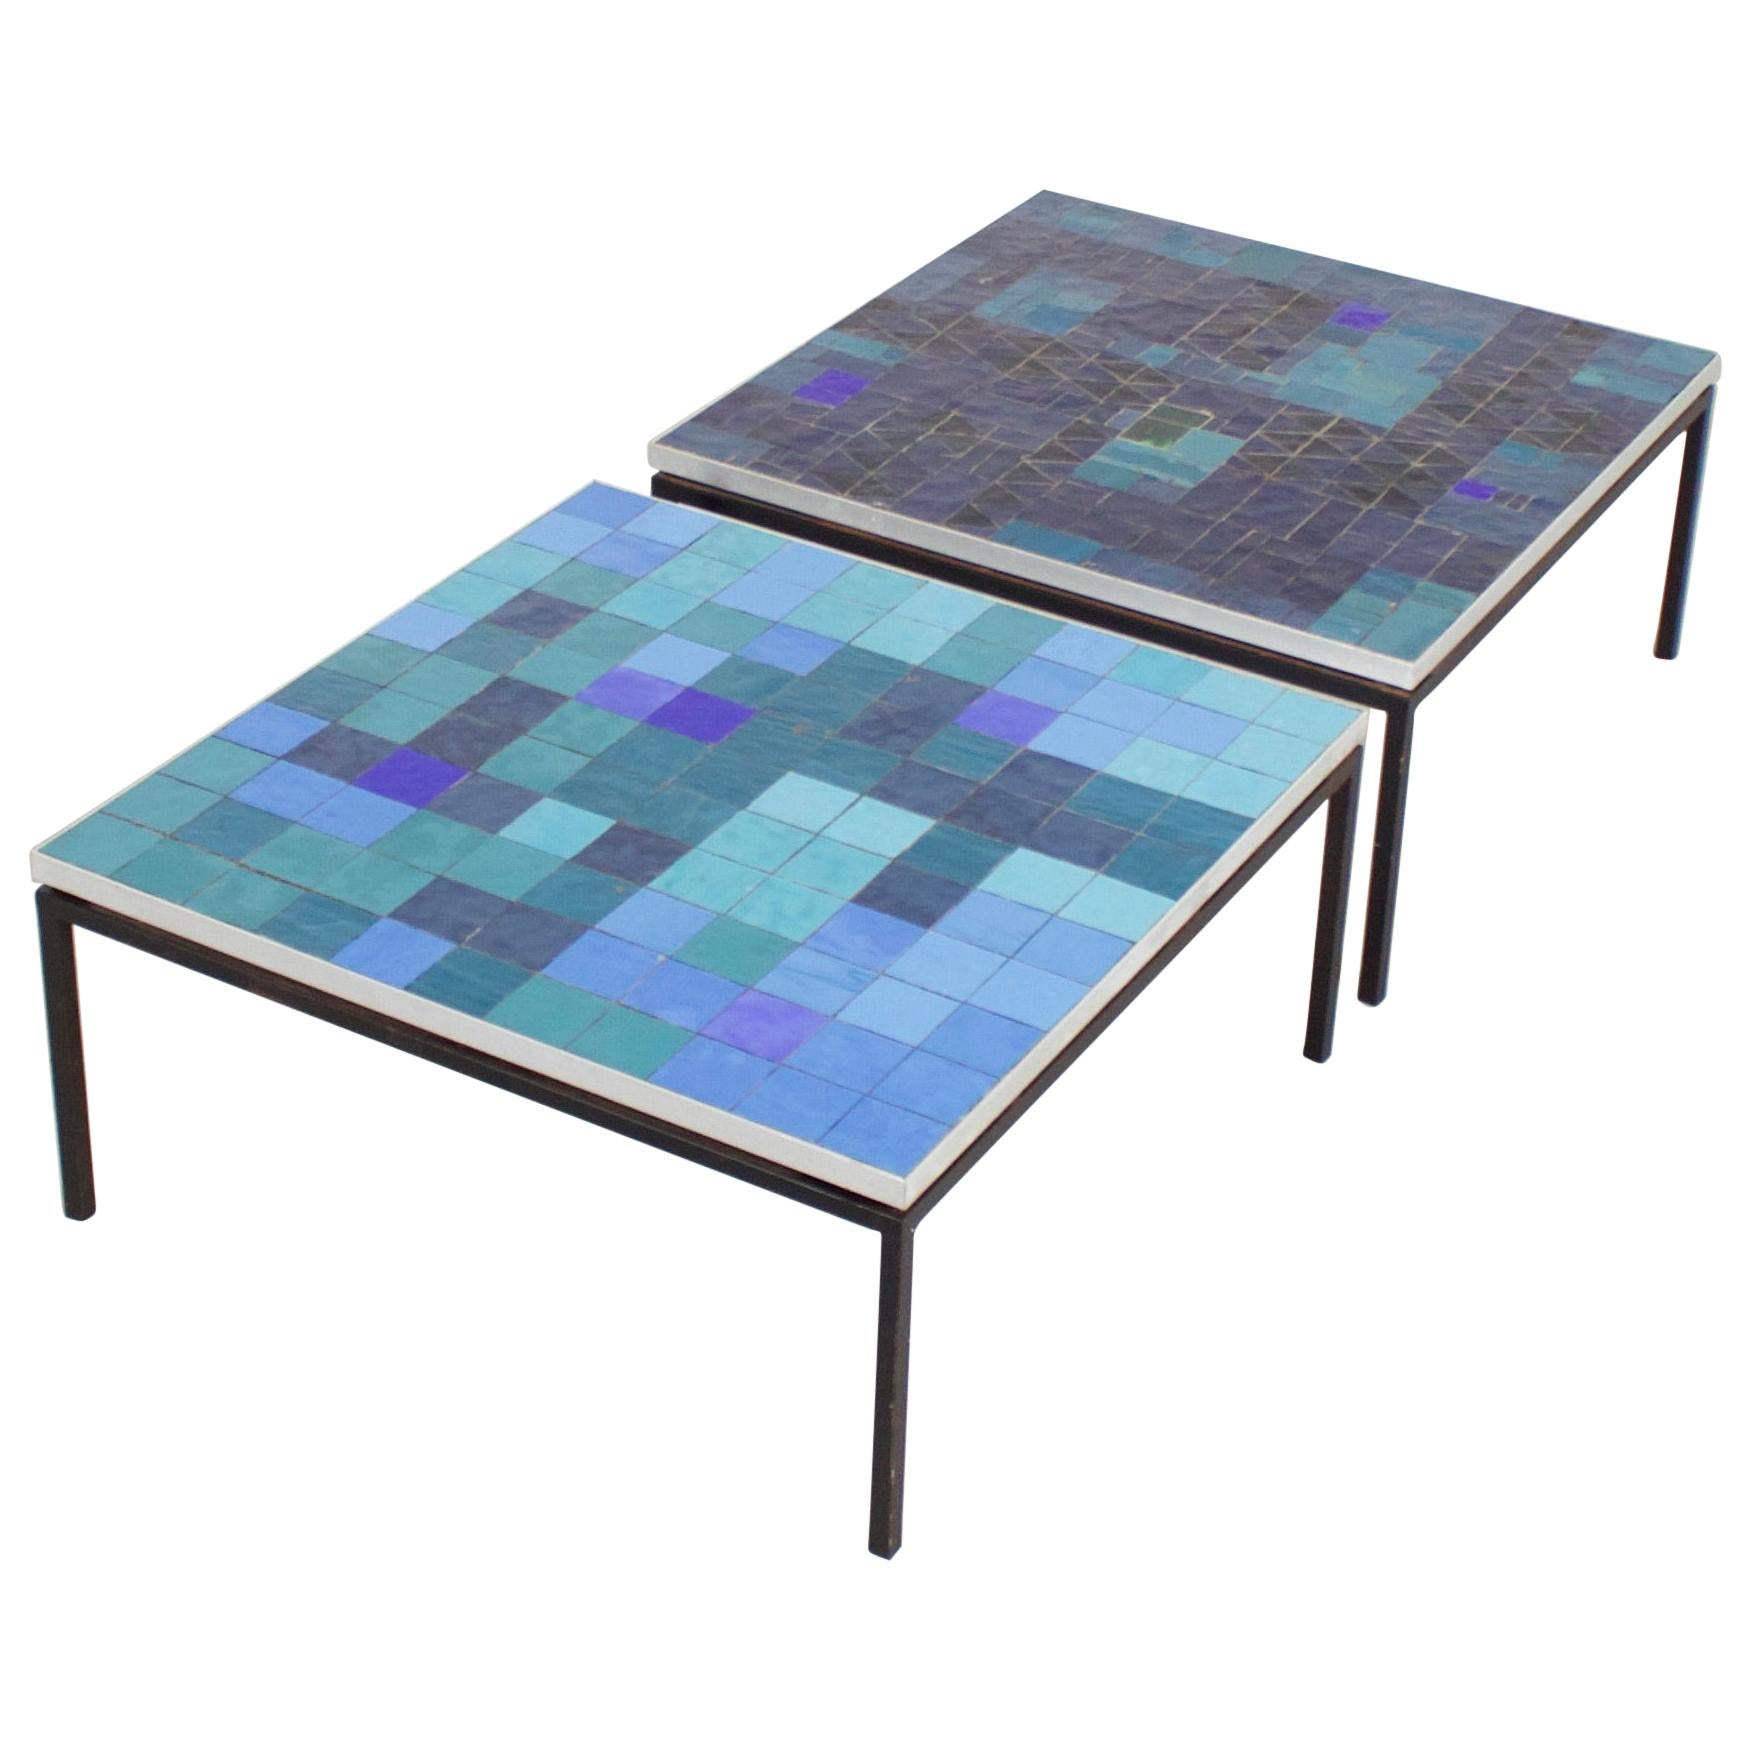 1/2 Impressive Mosaic Tile Coffee Table by Berthold Müller, 1960s